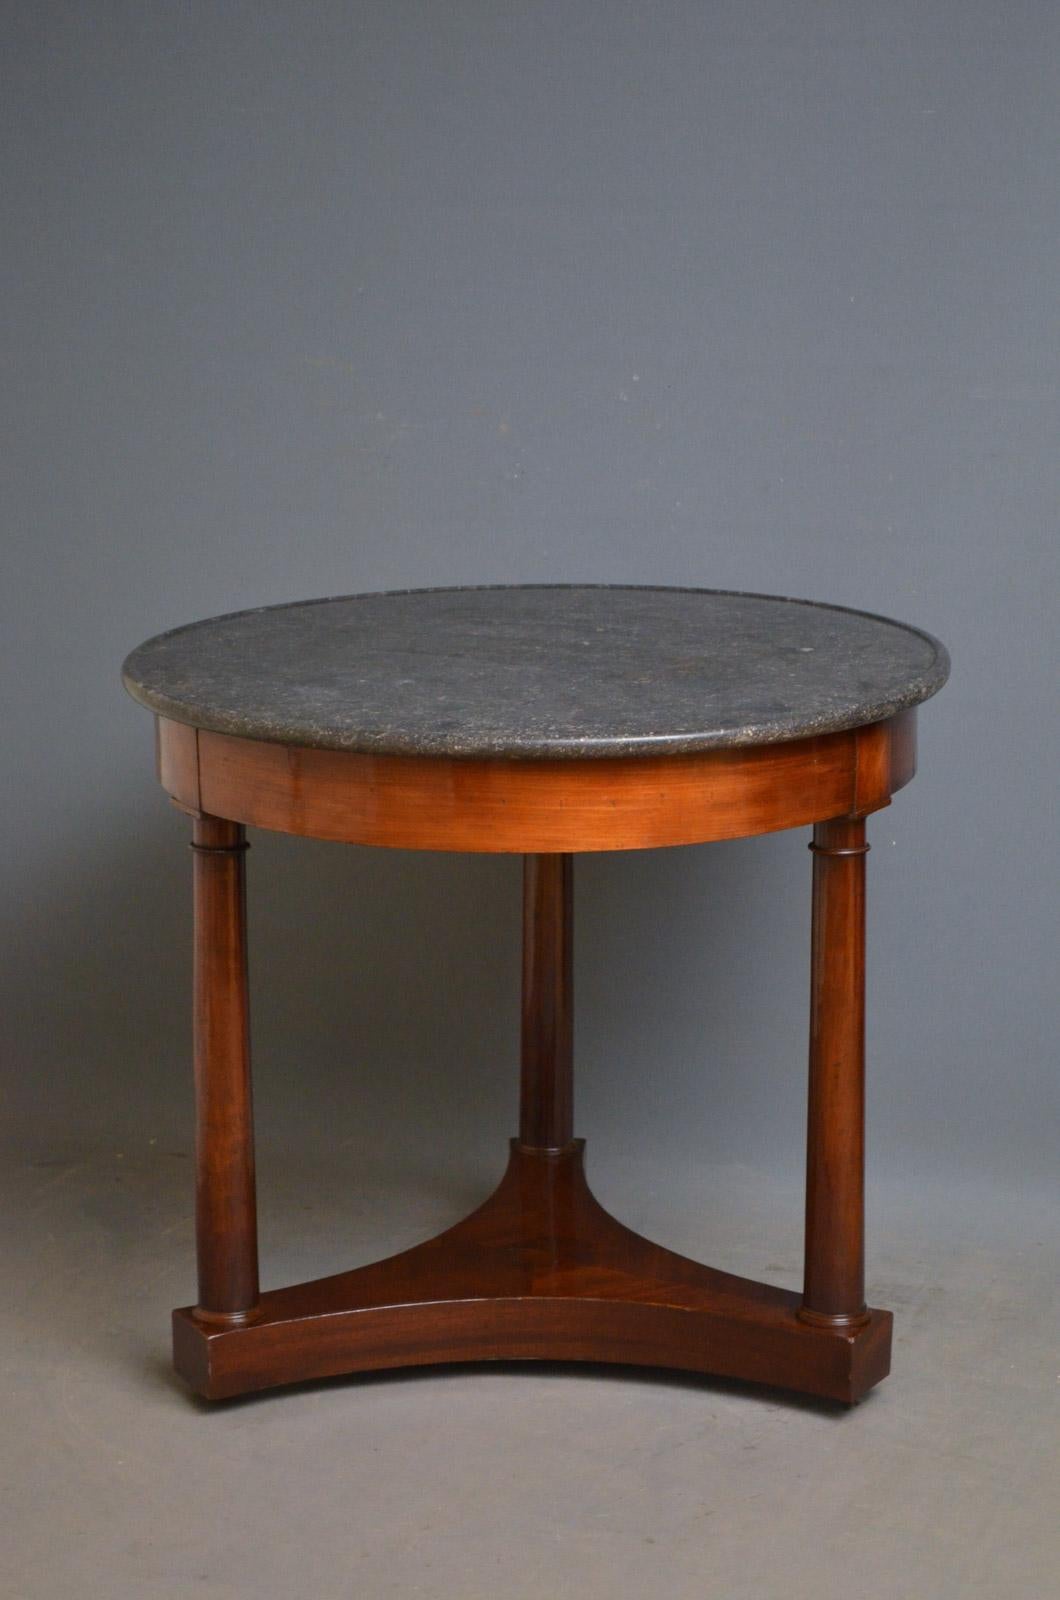 Sn4462, elegant French mahogany centre table with original marble top and 3 turned supports terminating in treform base and castors. This centre table is in excellent condition throughout, ready to place at home, circa 1880.
Measures: Height 29